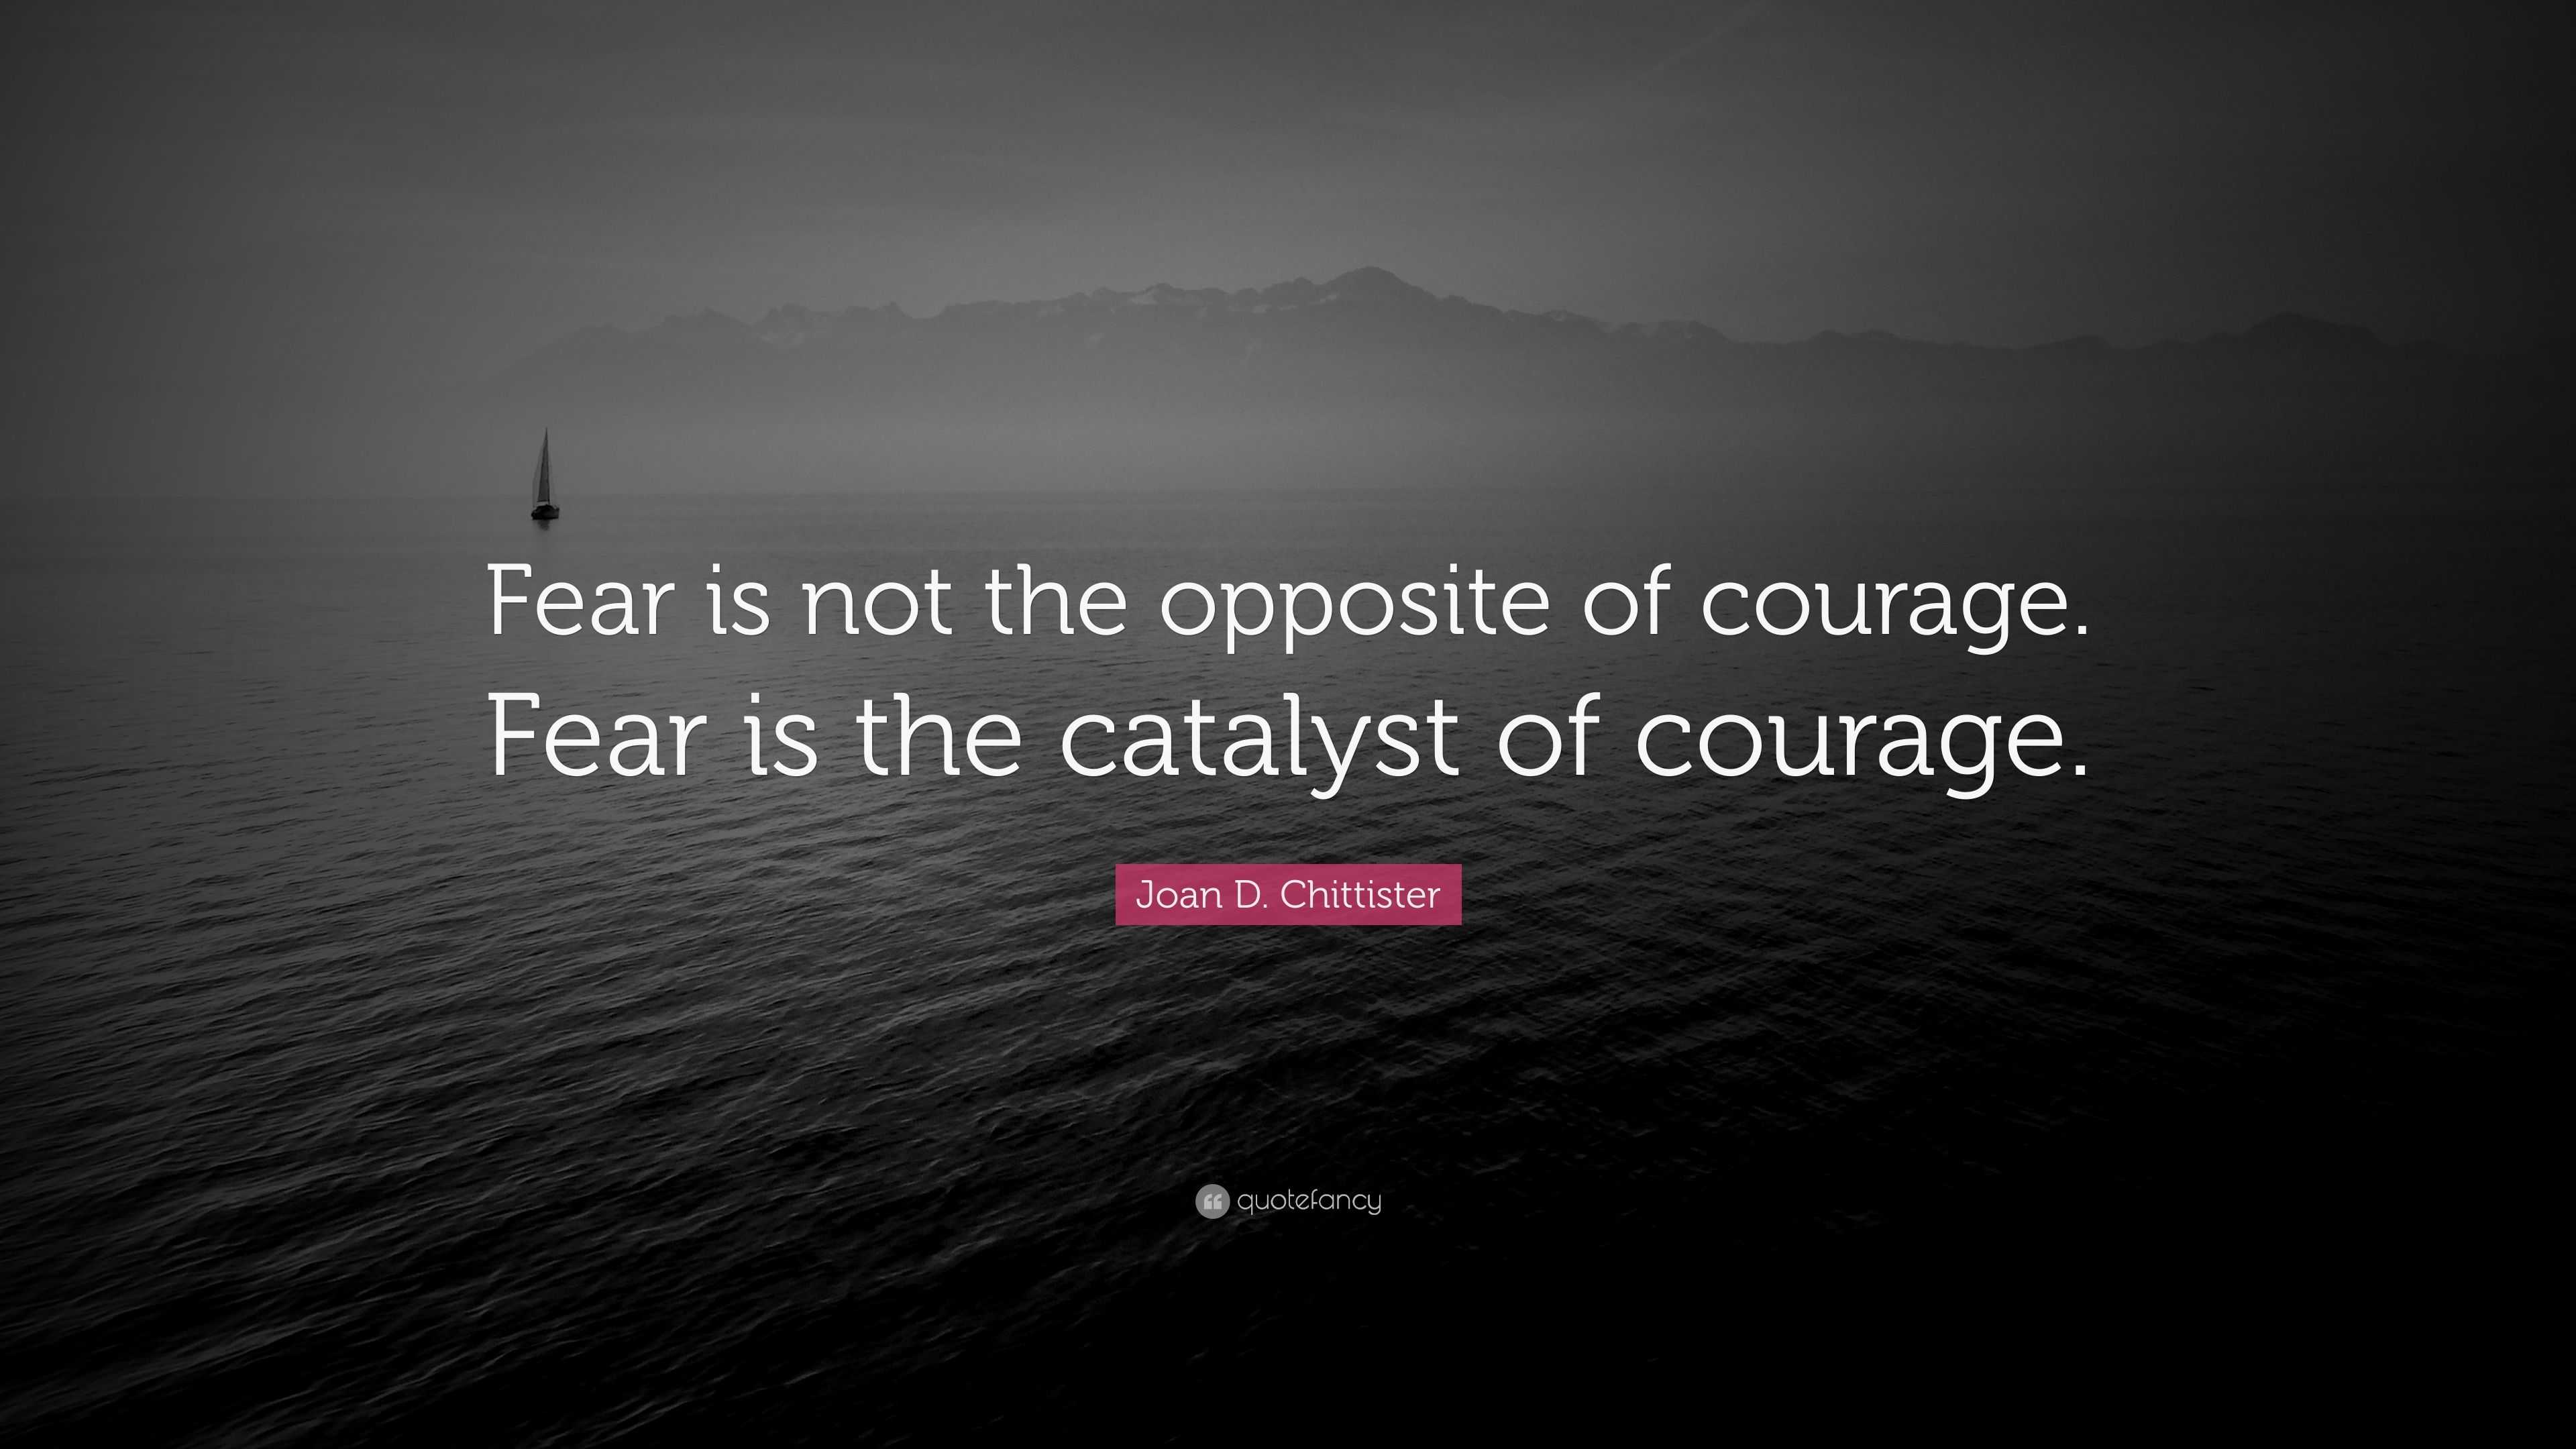 Joan D. Chittister Quote: “Fear is not the opposite of courage. Fear is ...